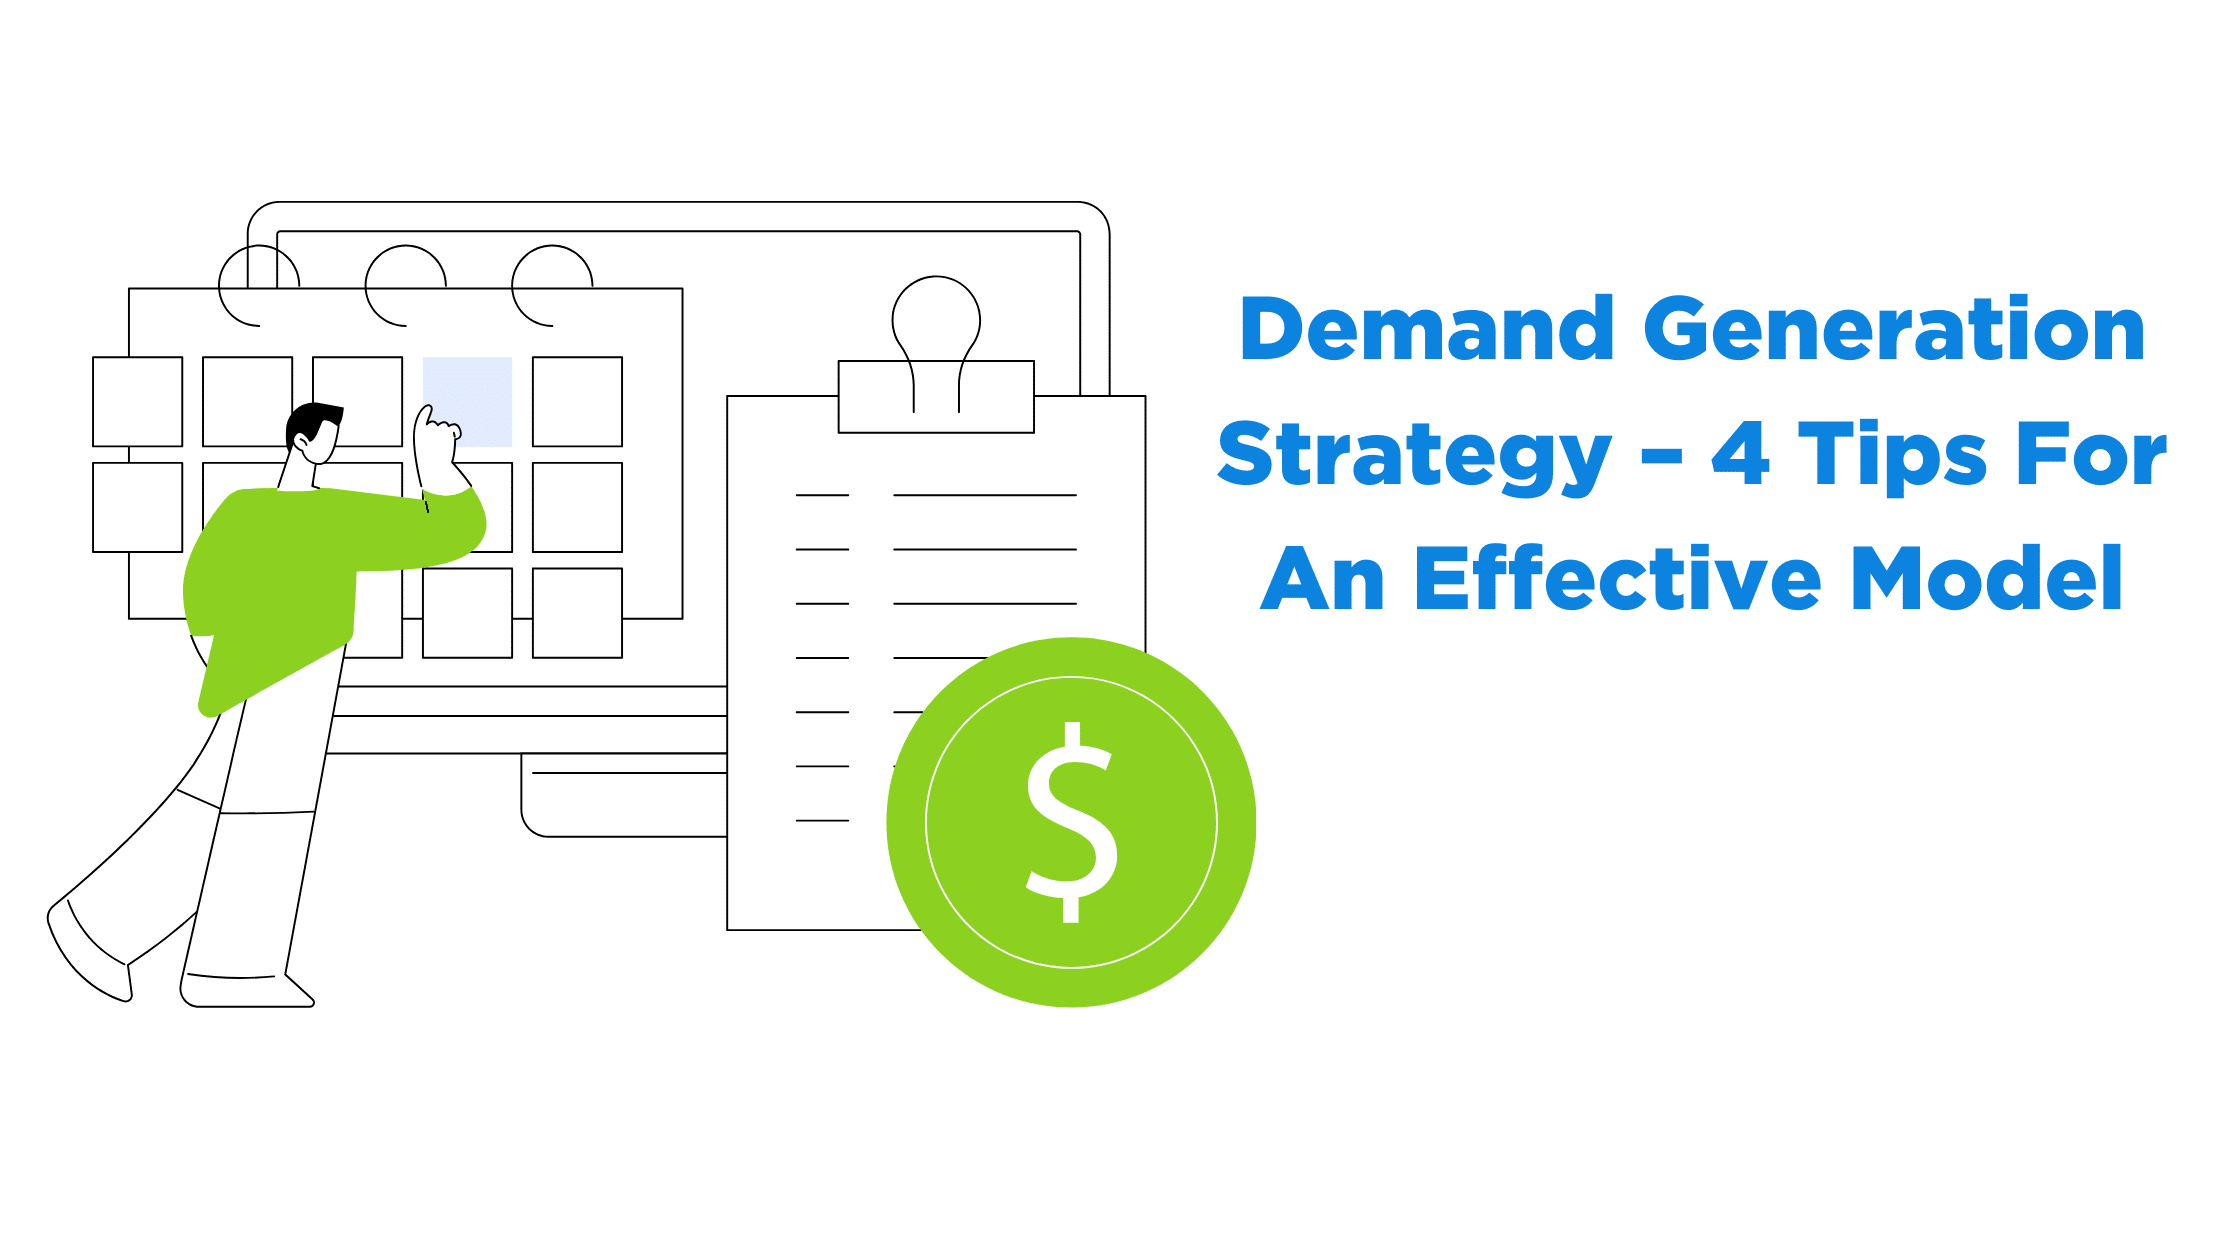 Demand Generation Strategy – 4 Tips For An Effective Model